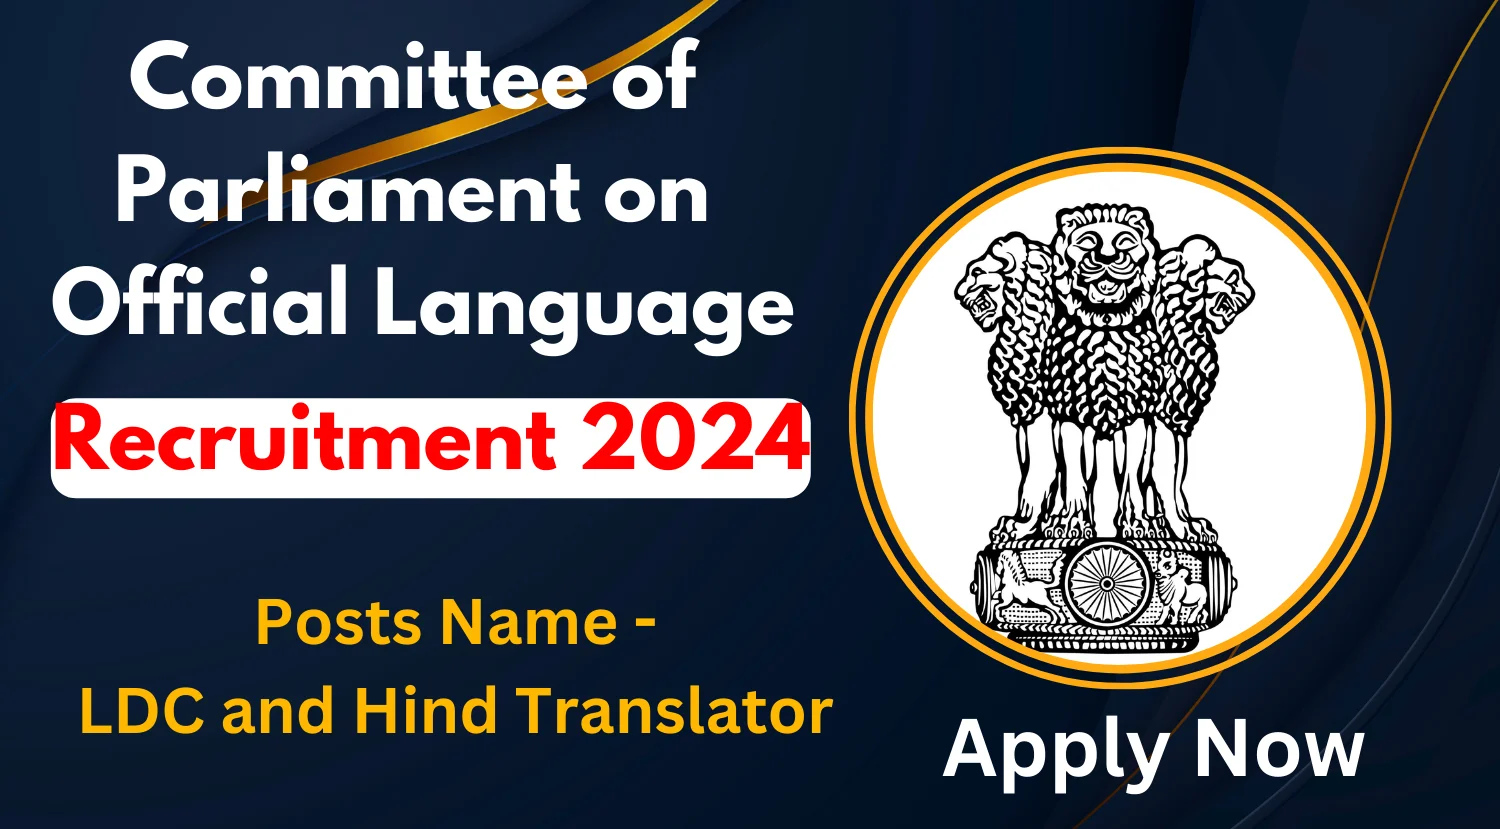 Committee of Parliament on Official Language Recruitment 2024